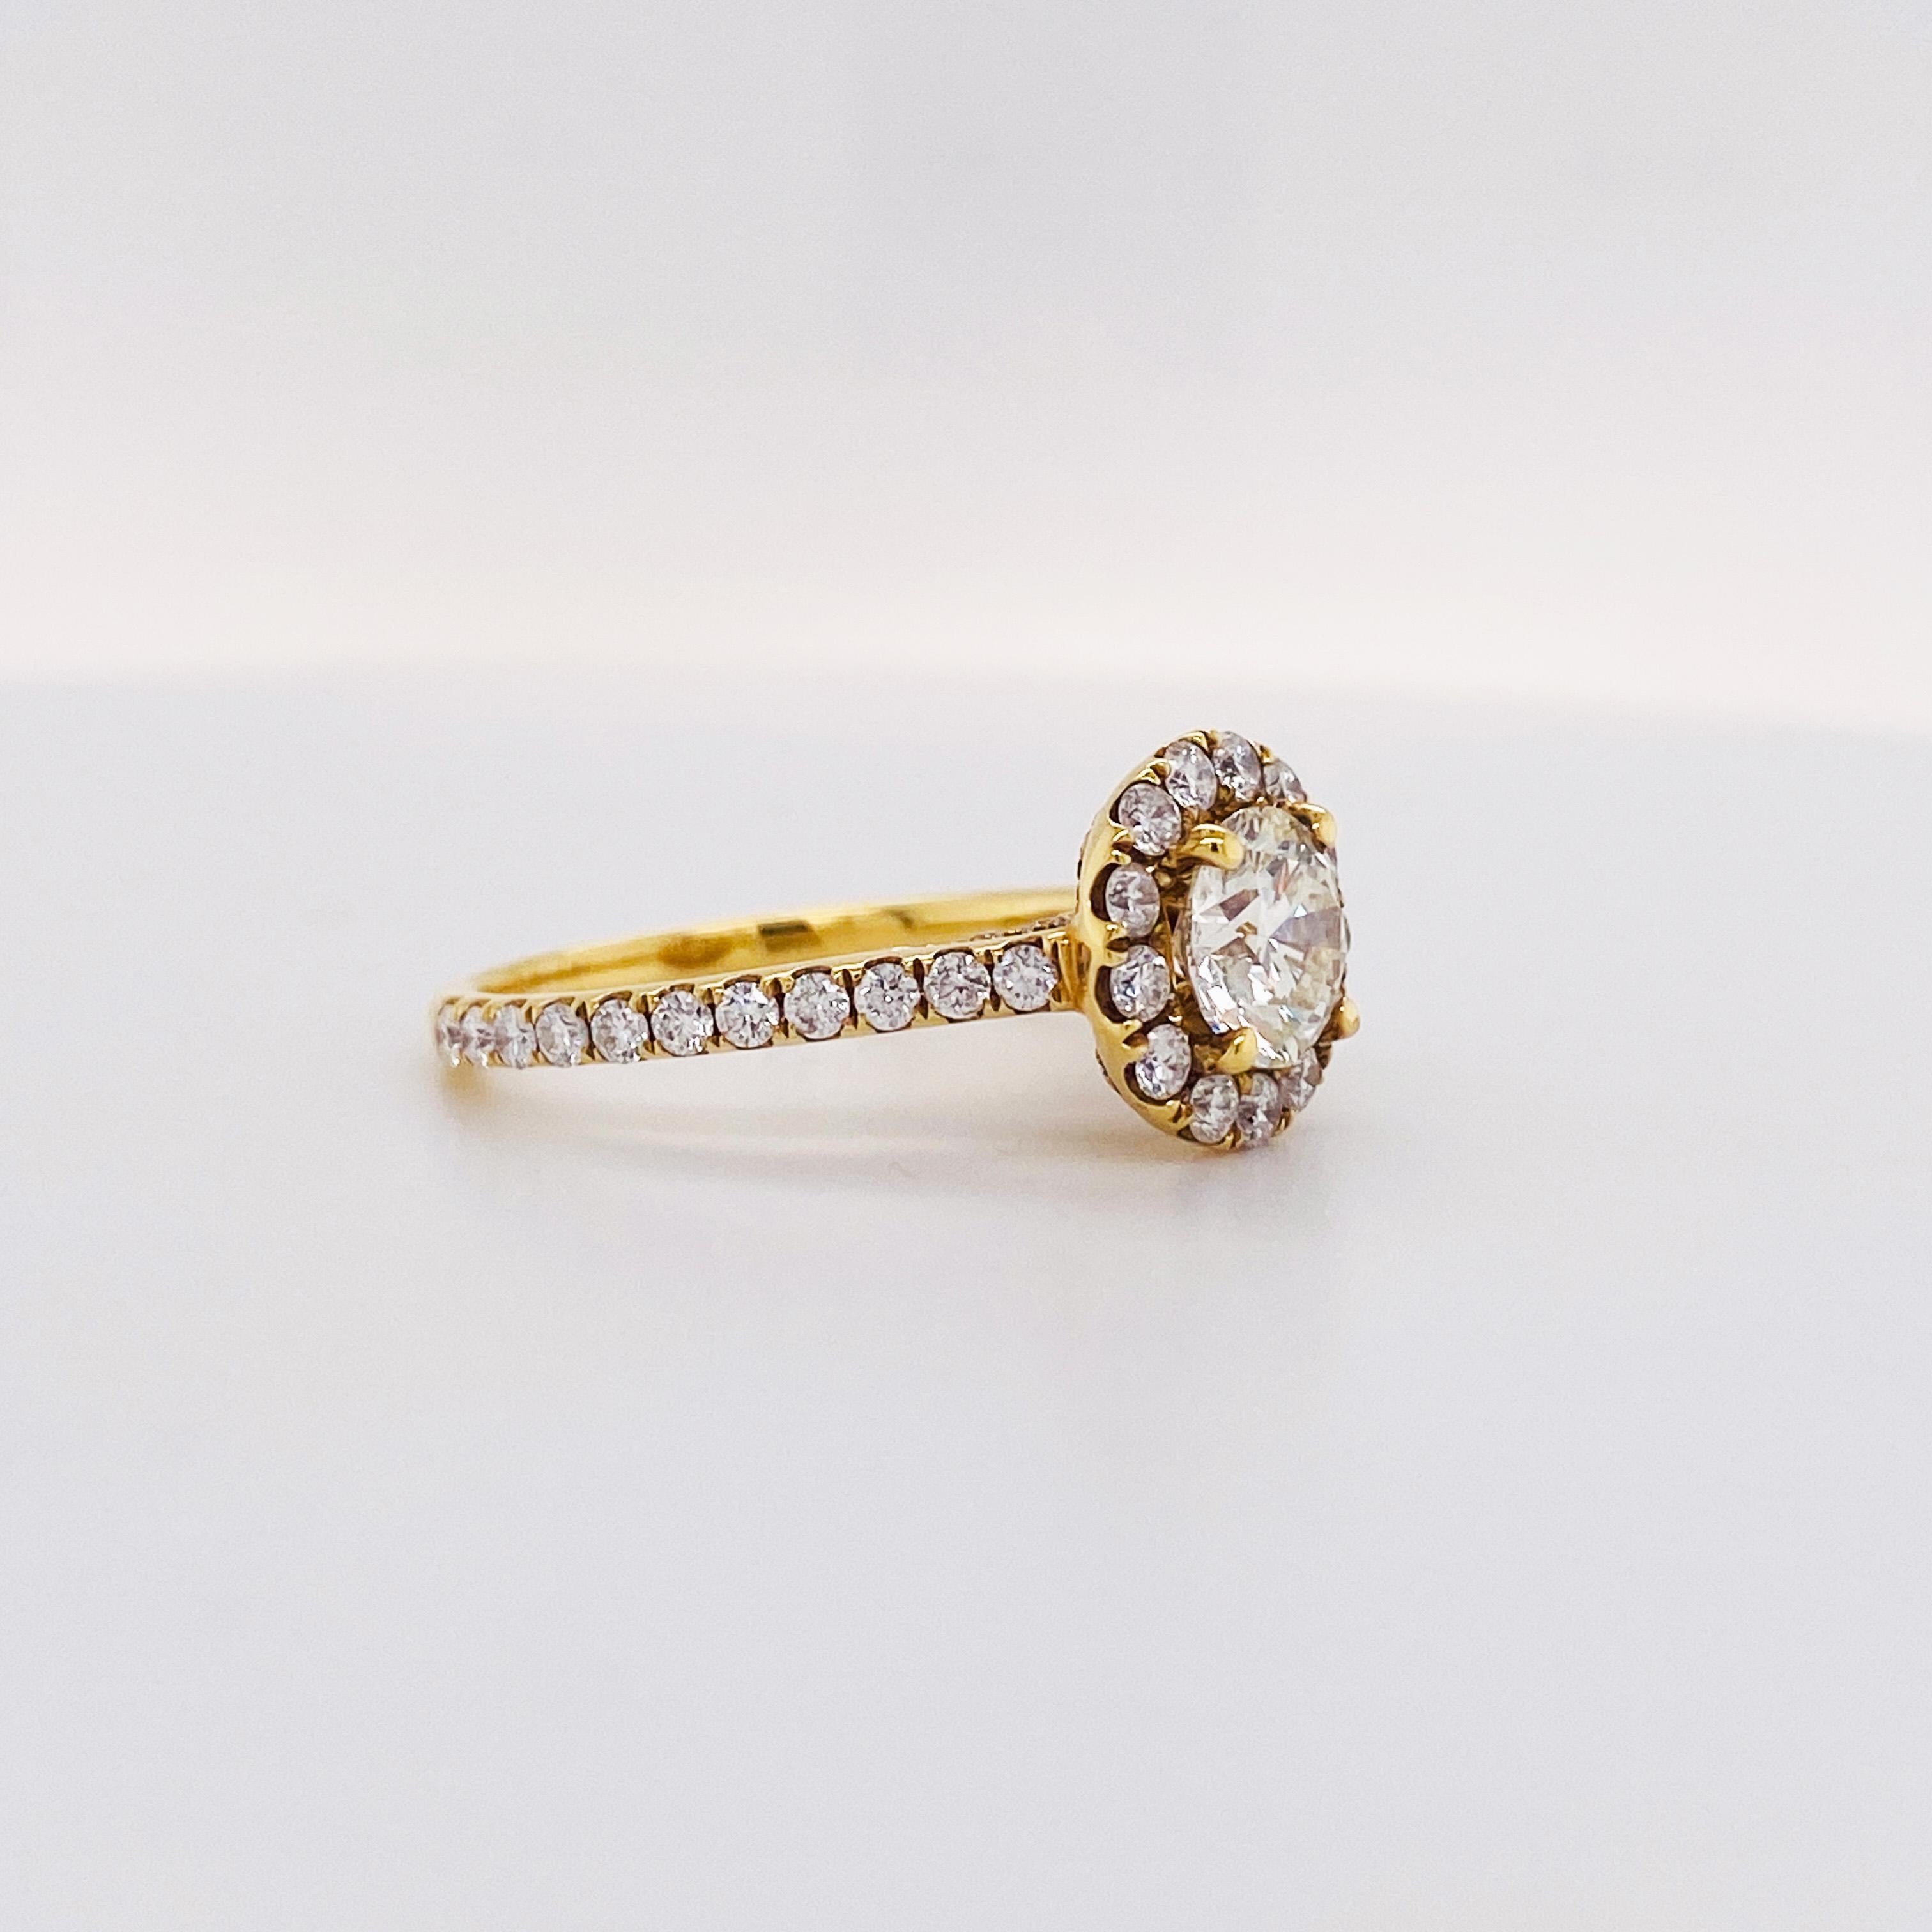 This 18 karat yellow gold diamond engagement ring holds a 1.00 carat round brilliant diamond, SI2 clarity and H color with a diamond halo surrounding the center stone. The ring has a diamond band that goes 3/4 around the ring and comes up in a